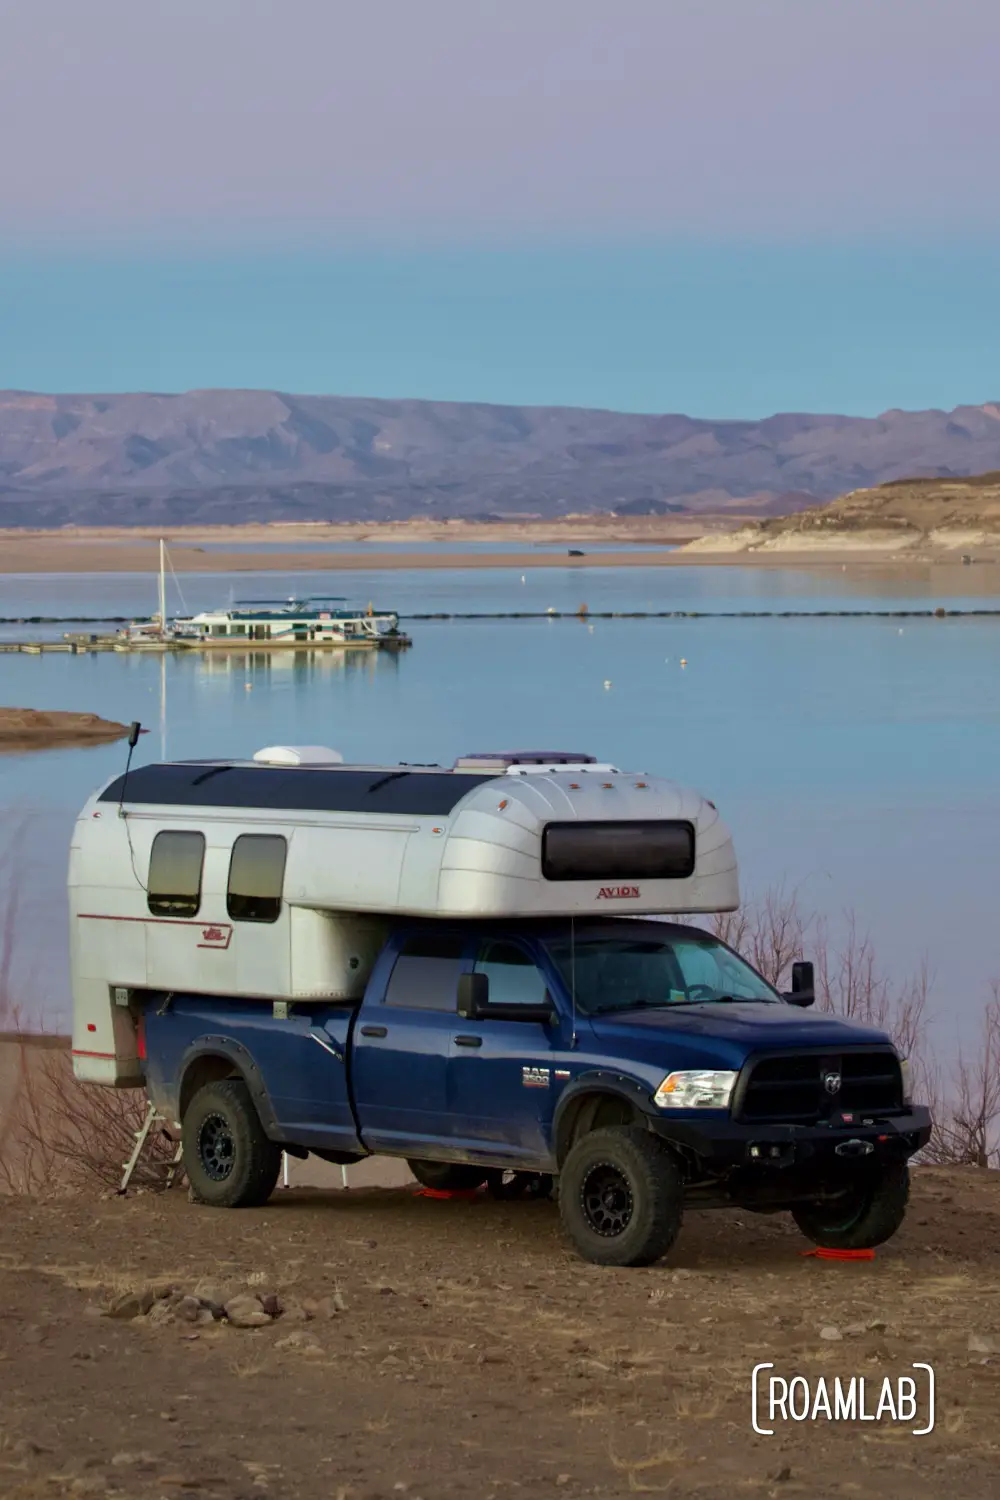 1970 Avion C11 truck camper parked on the shore of Elephant Butte Lake at dusk.